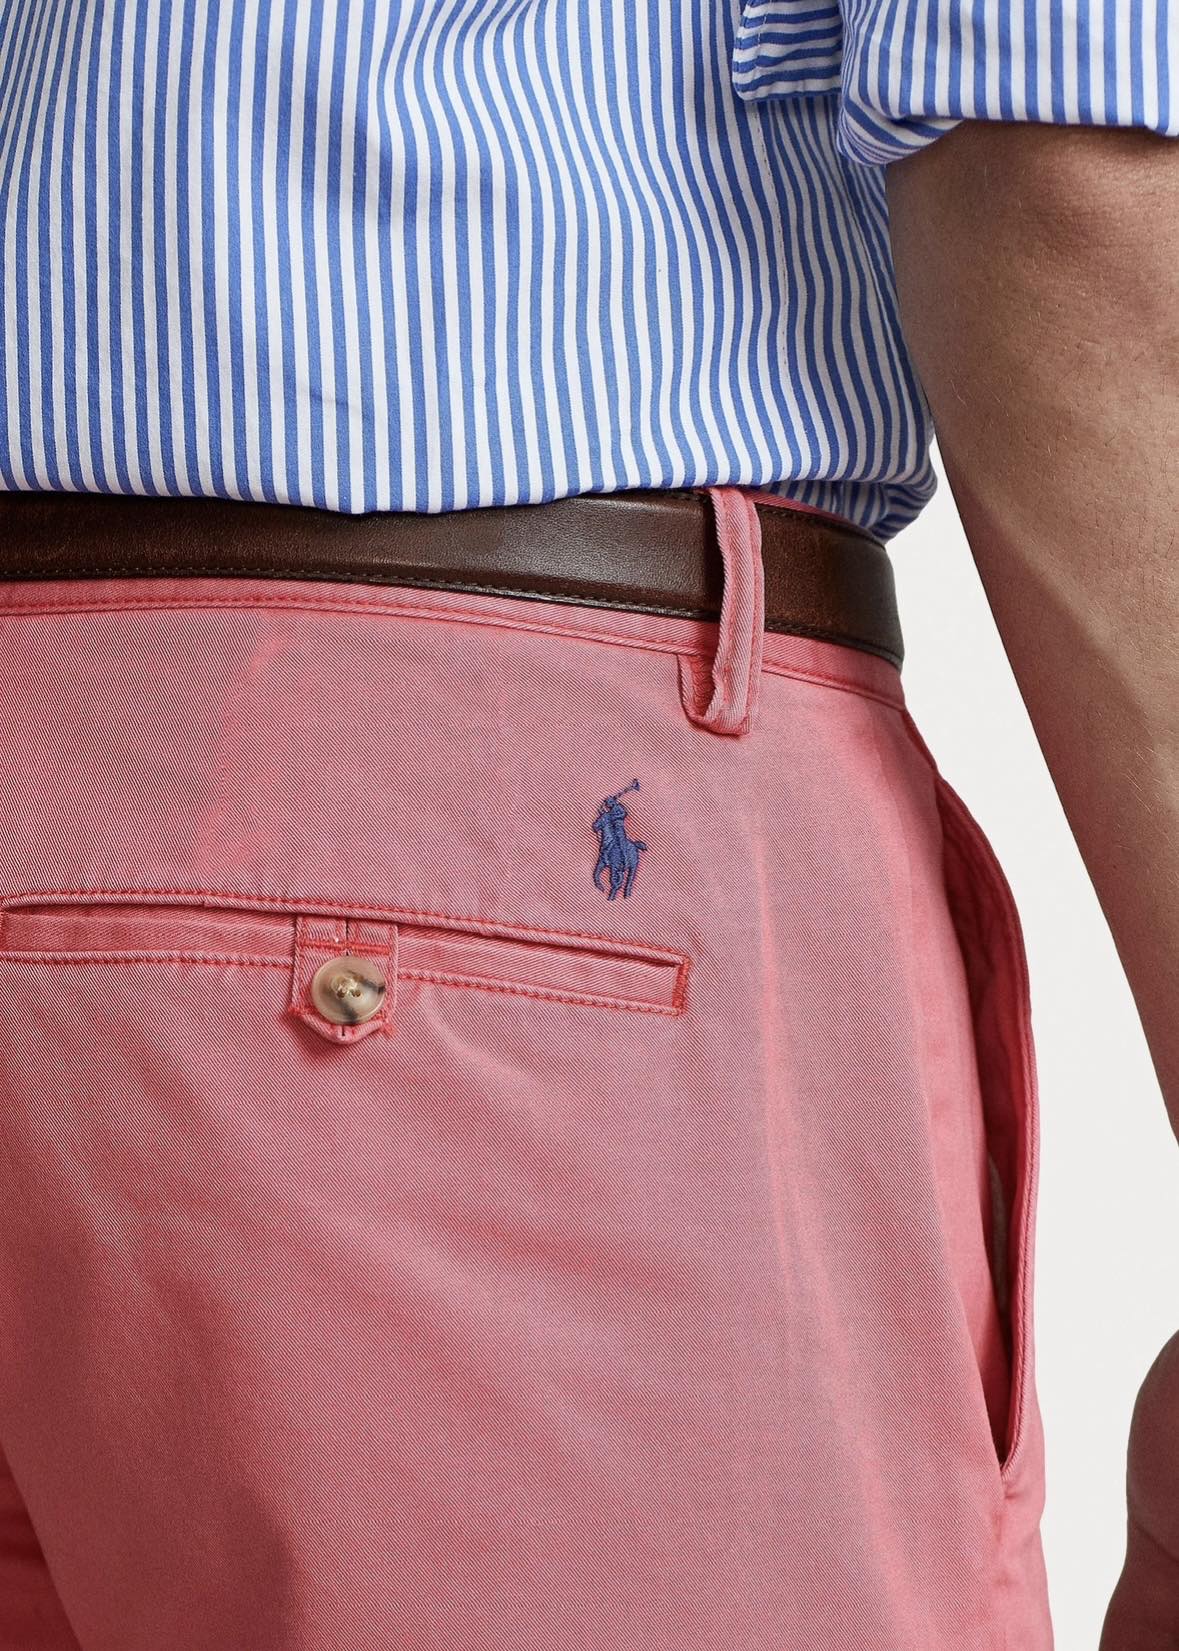 Polo Ralph Lauren Stretch Straight Fit shorts - Nantucket Red